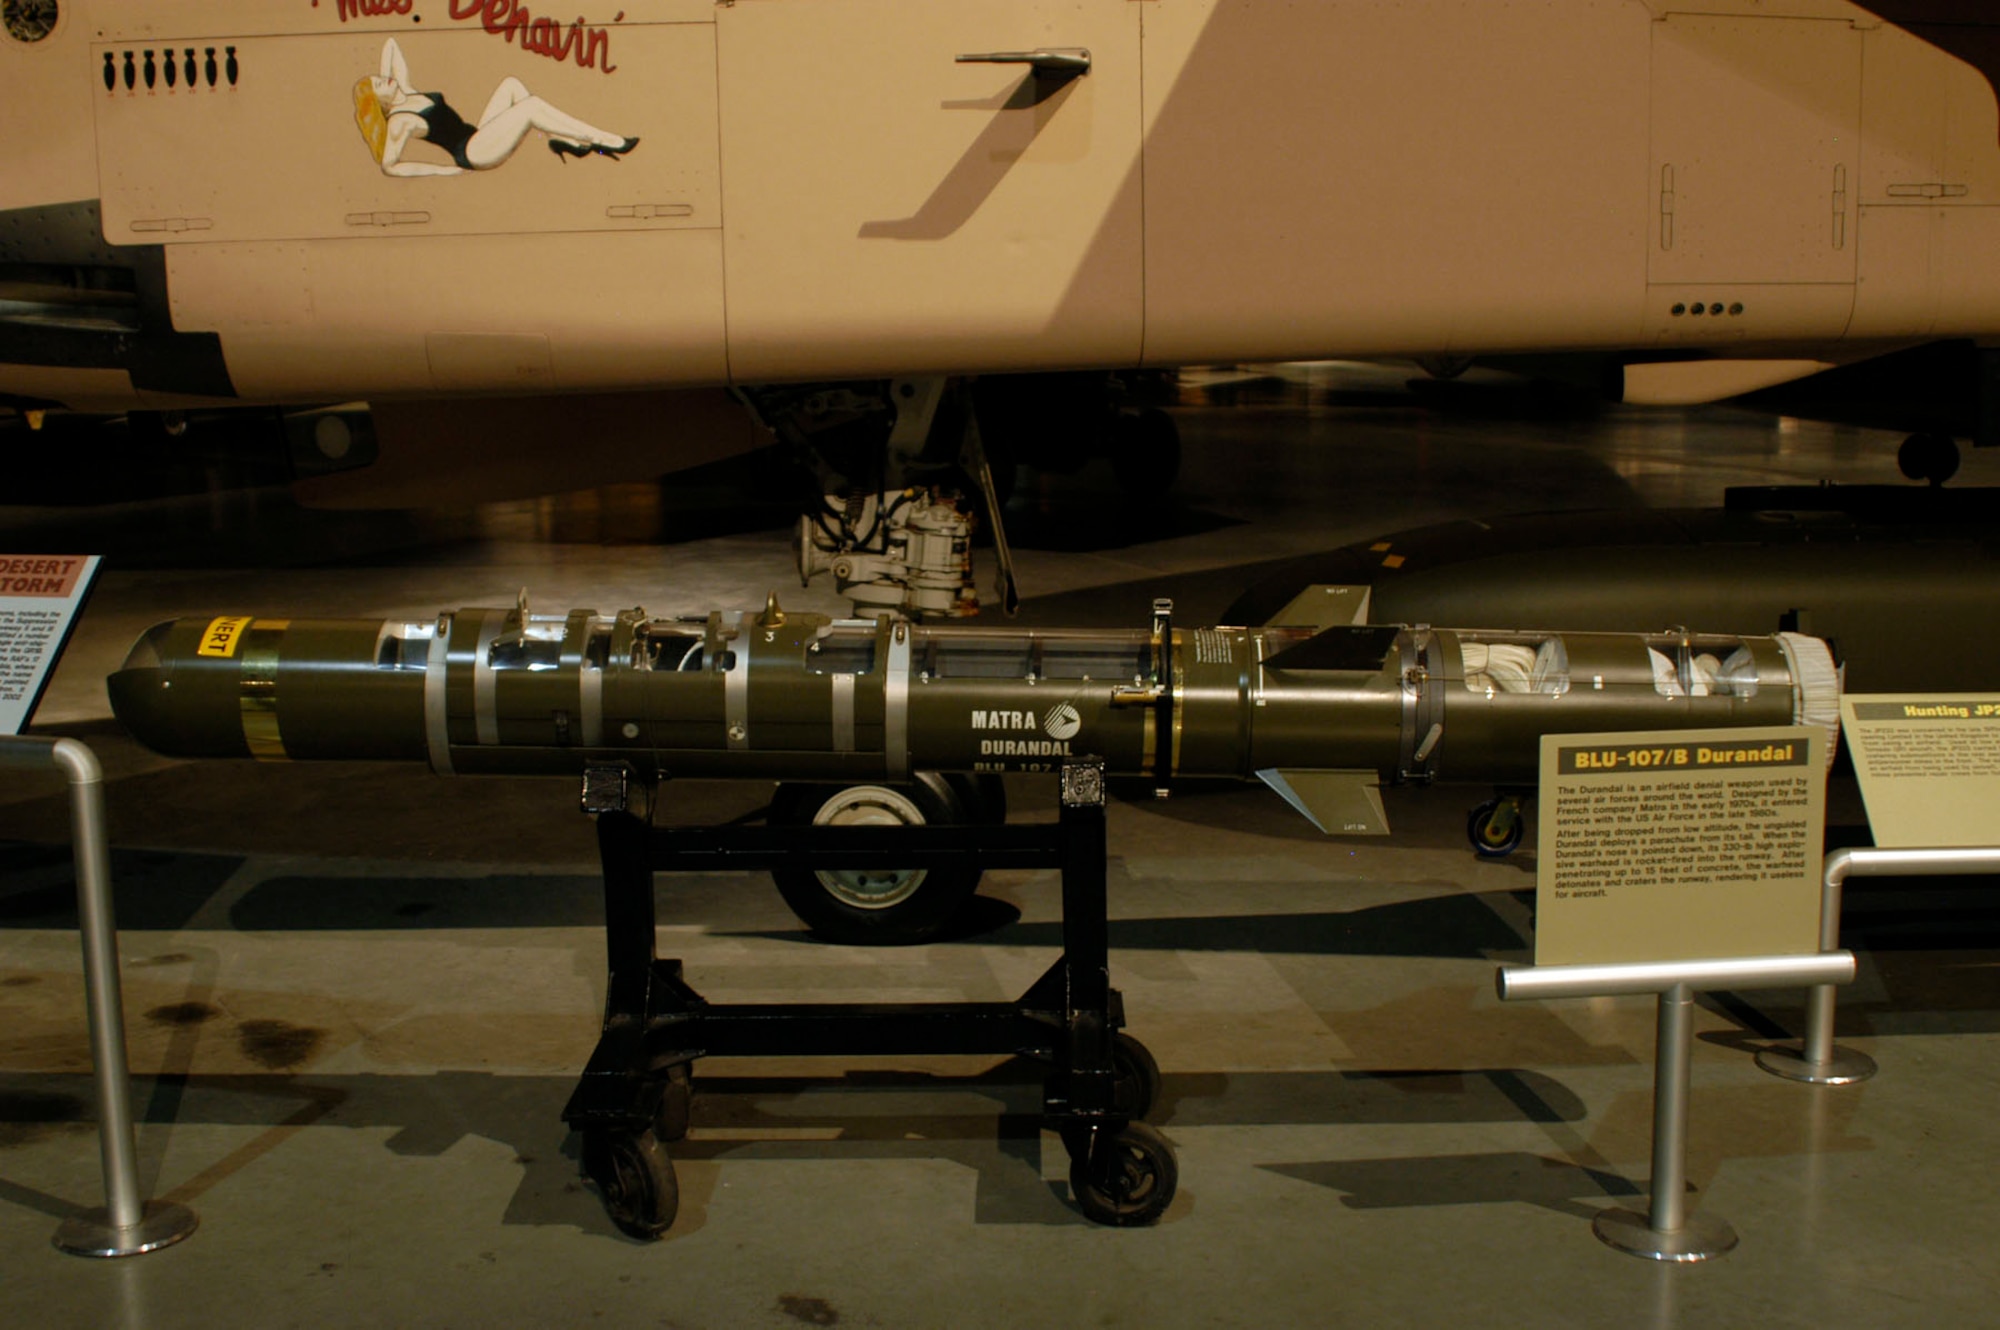 DAYTON, Ohio - The BLU-107/B Durandal on display in the Cold War Gallery at the National Museum of the U.S. Air Force. (U.S. Air Force photo)